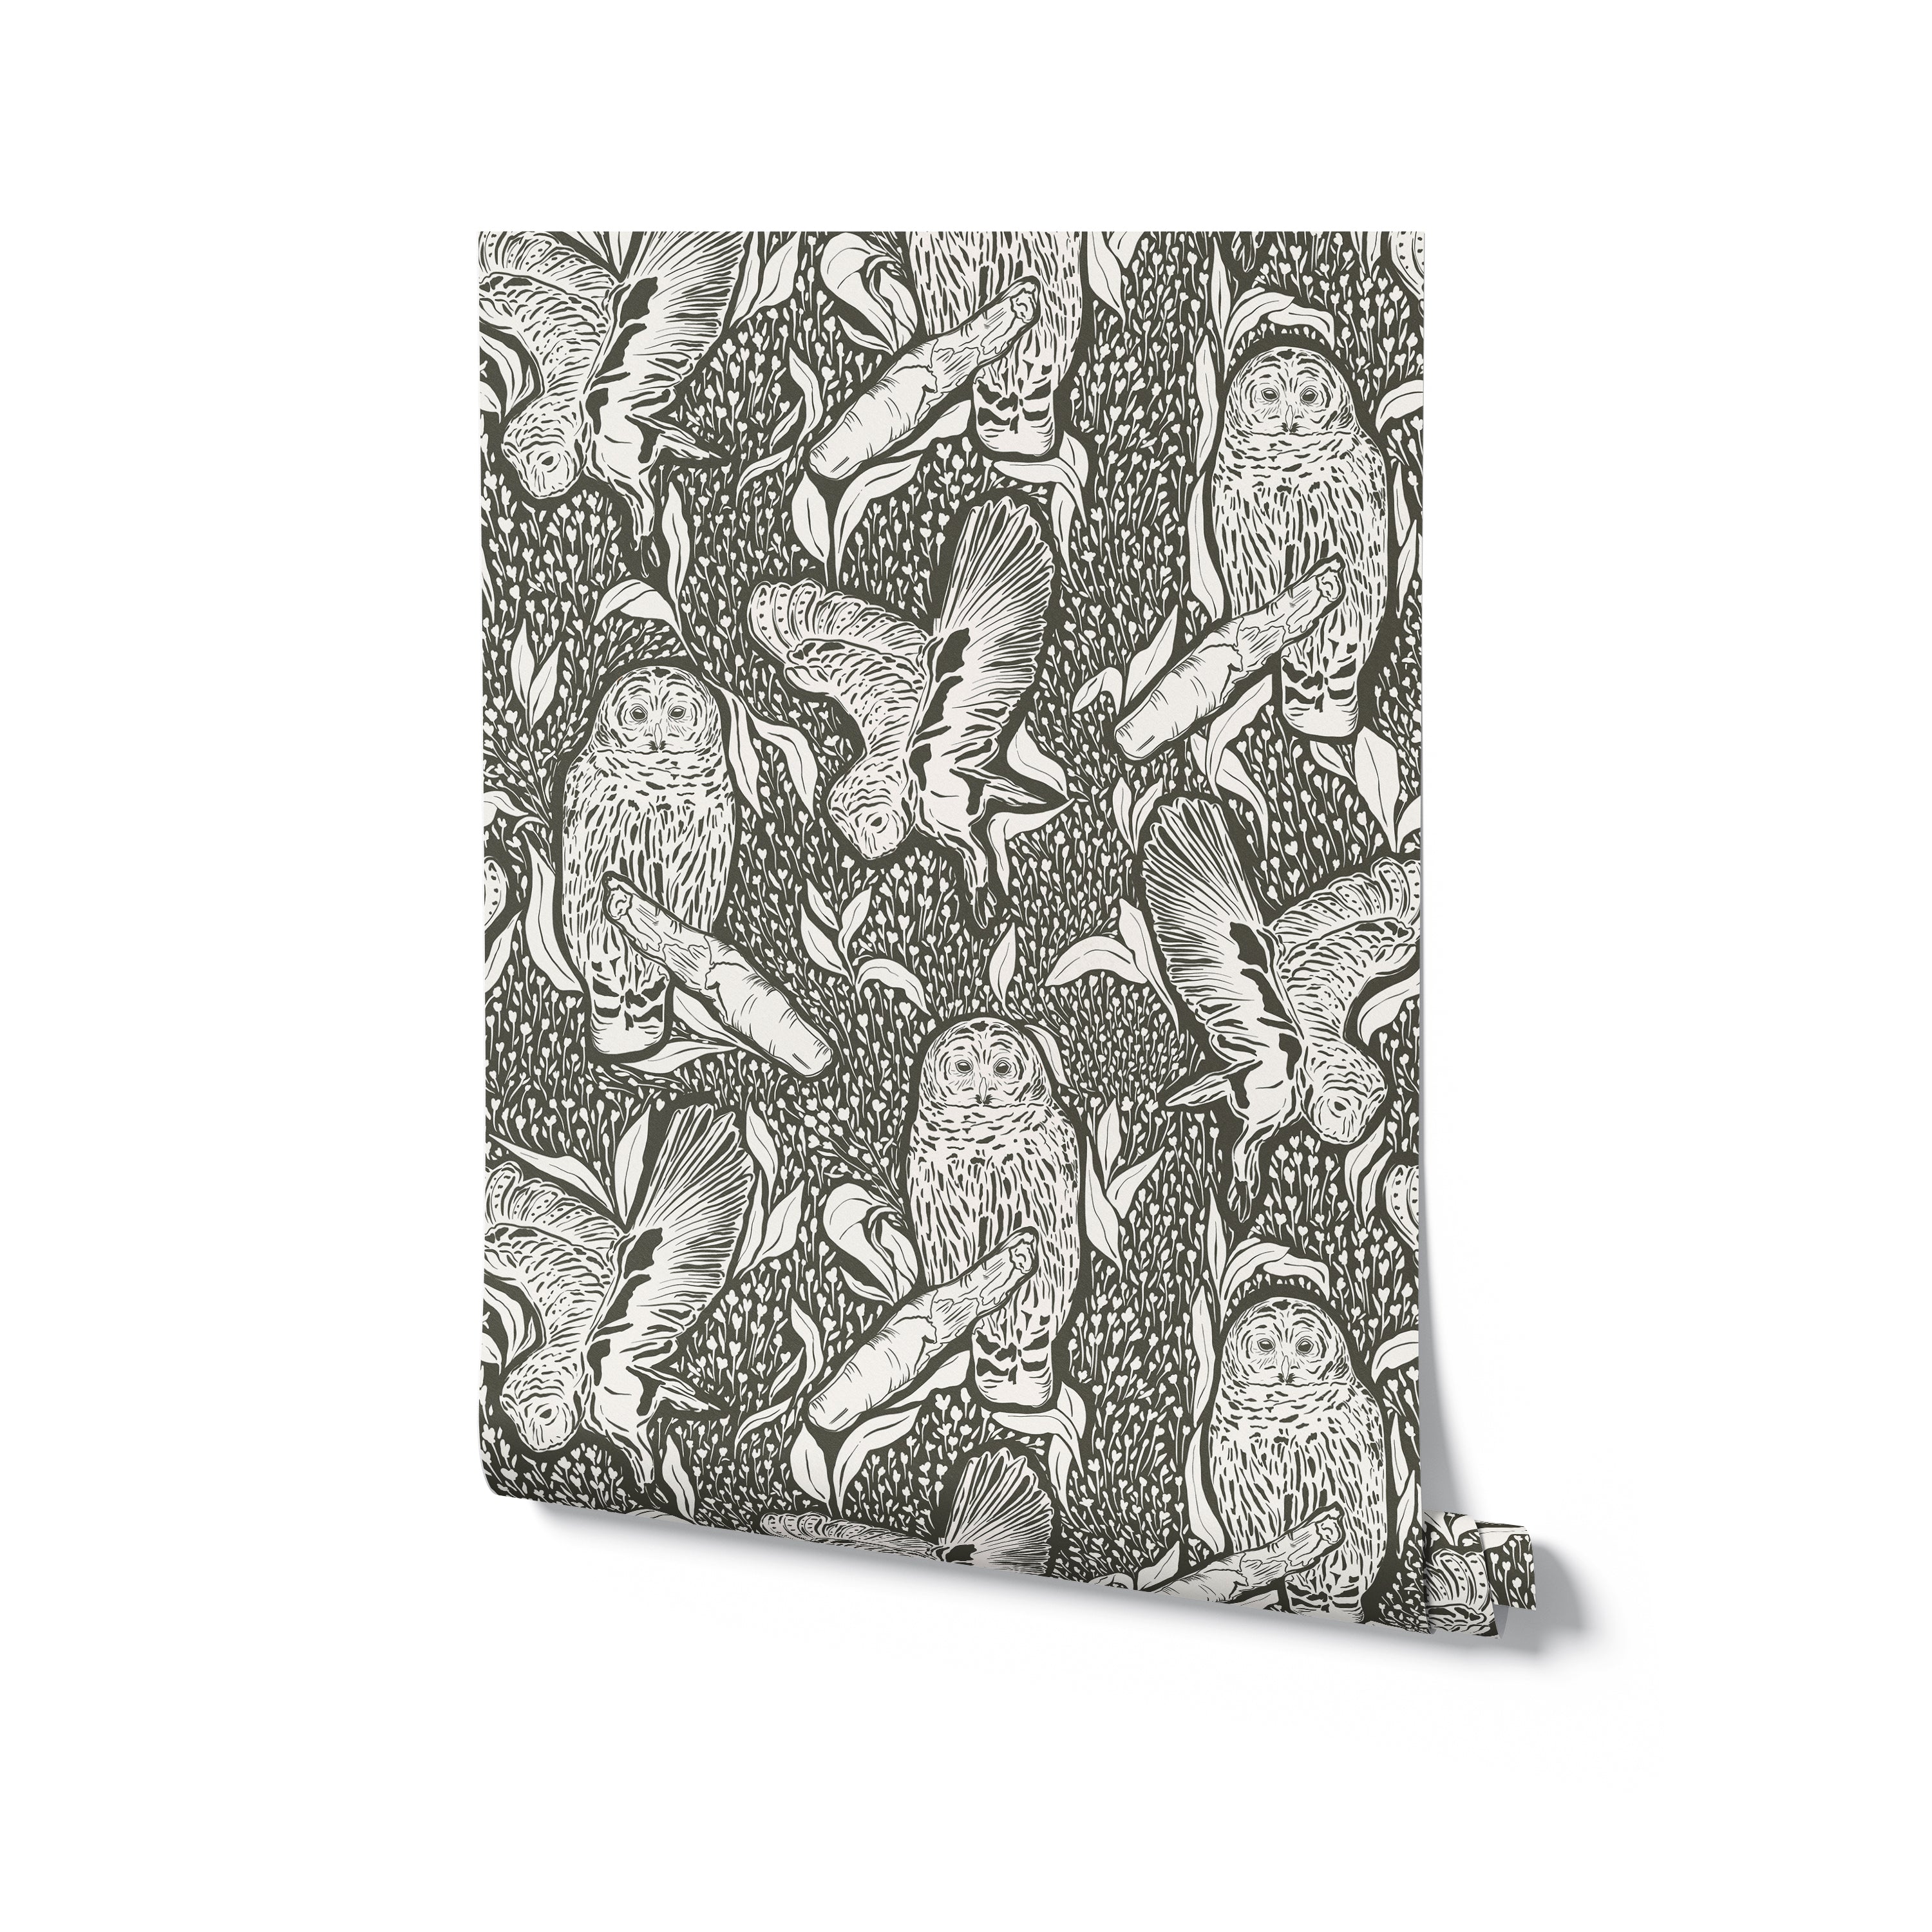 A roll of black and white wallpaper with a detailed owl and foliage pattern, presenting a captivating and nature-inspired design suitable for a stylish interior space